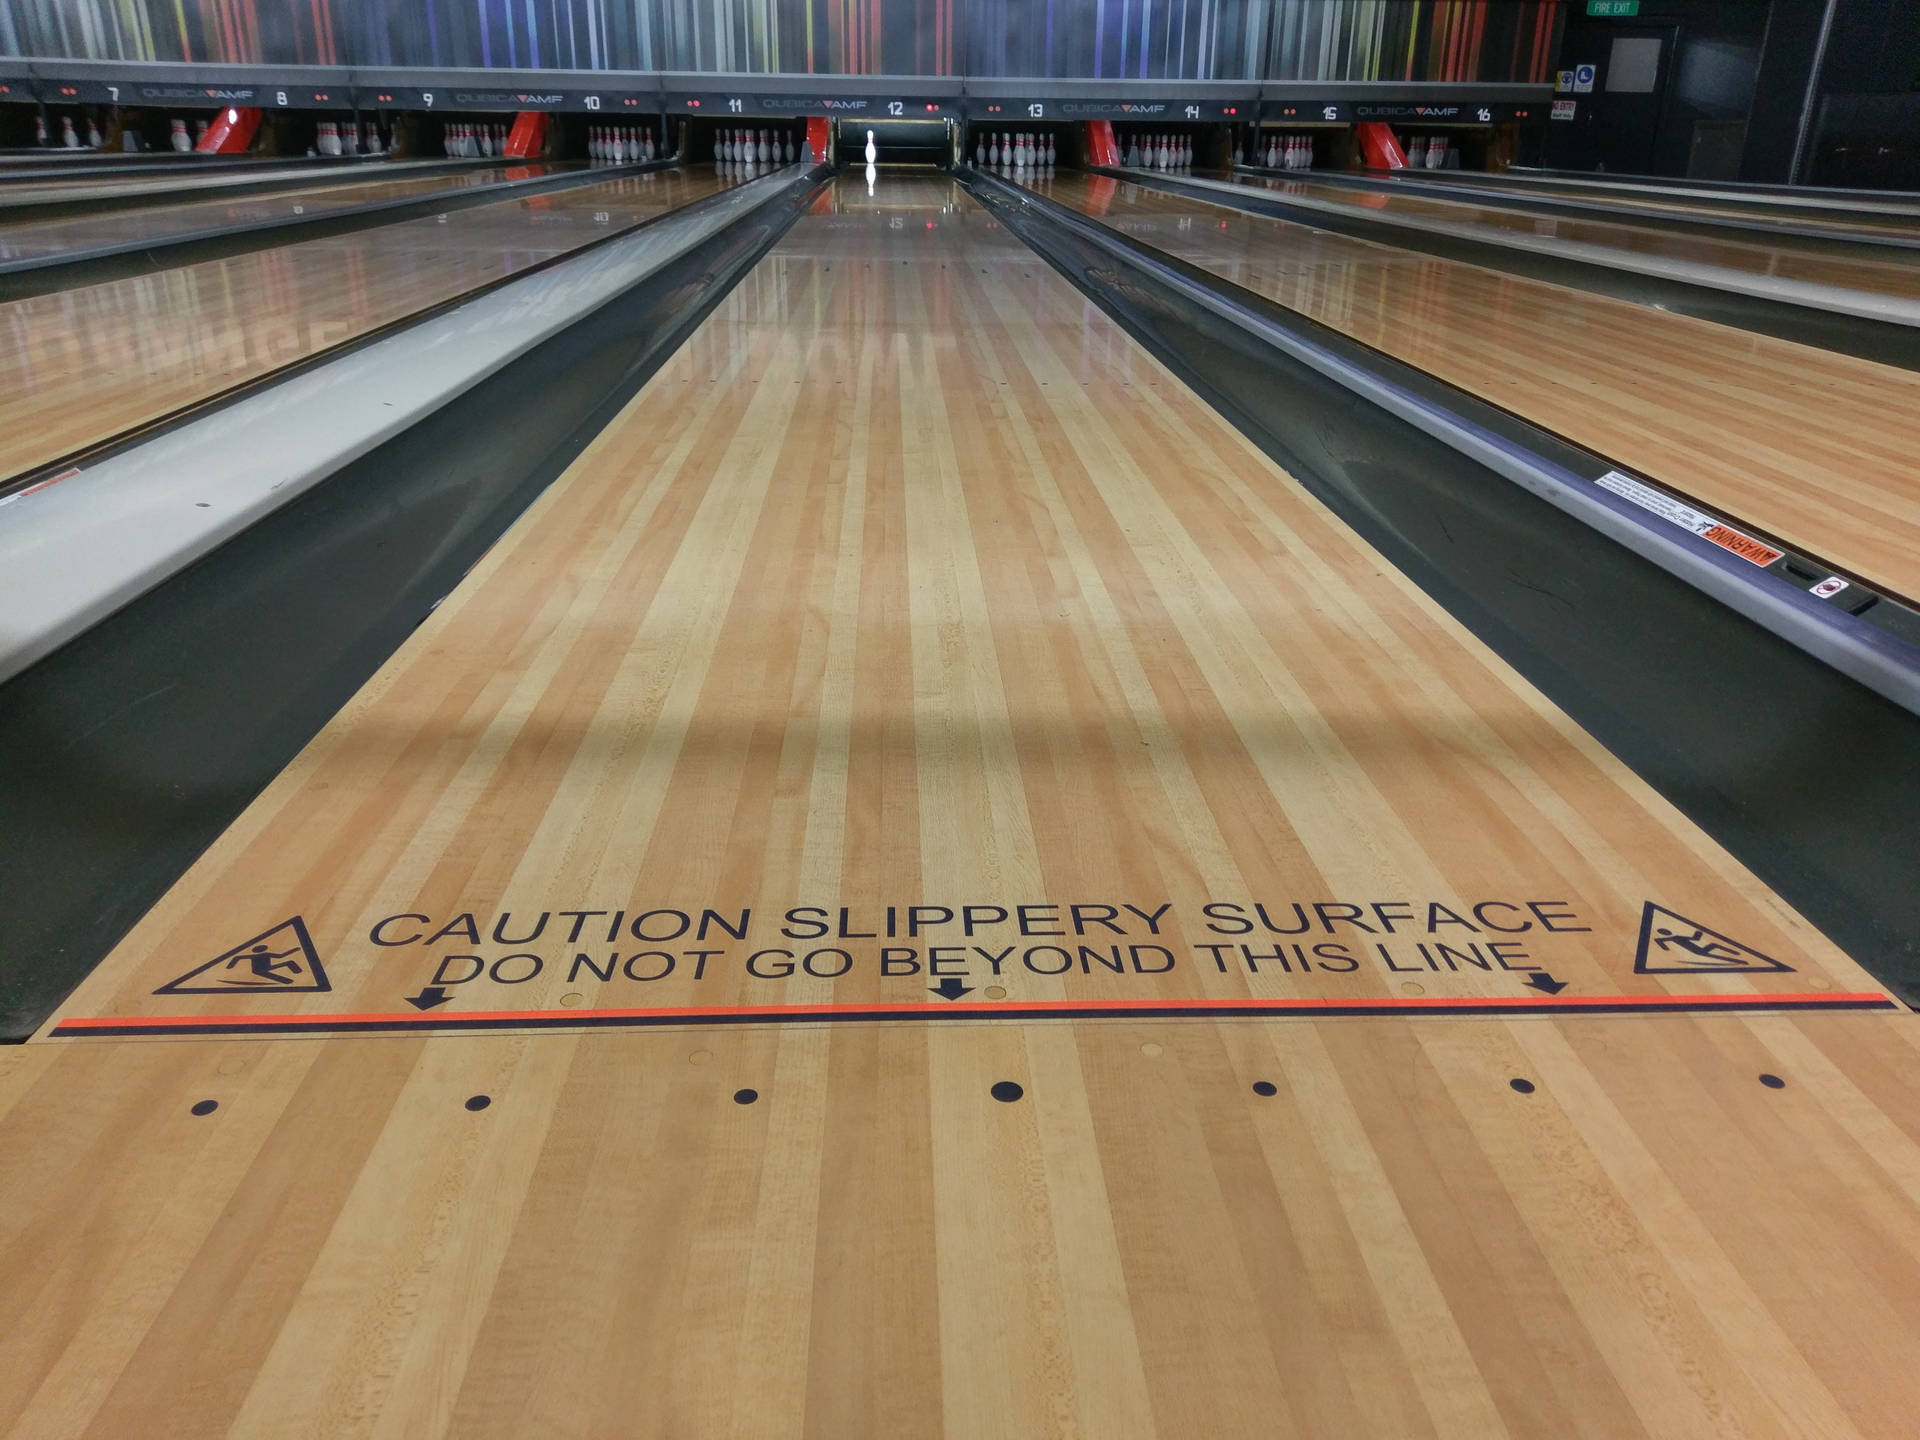 Caution Sign Bowling Lane Background